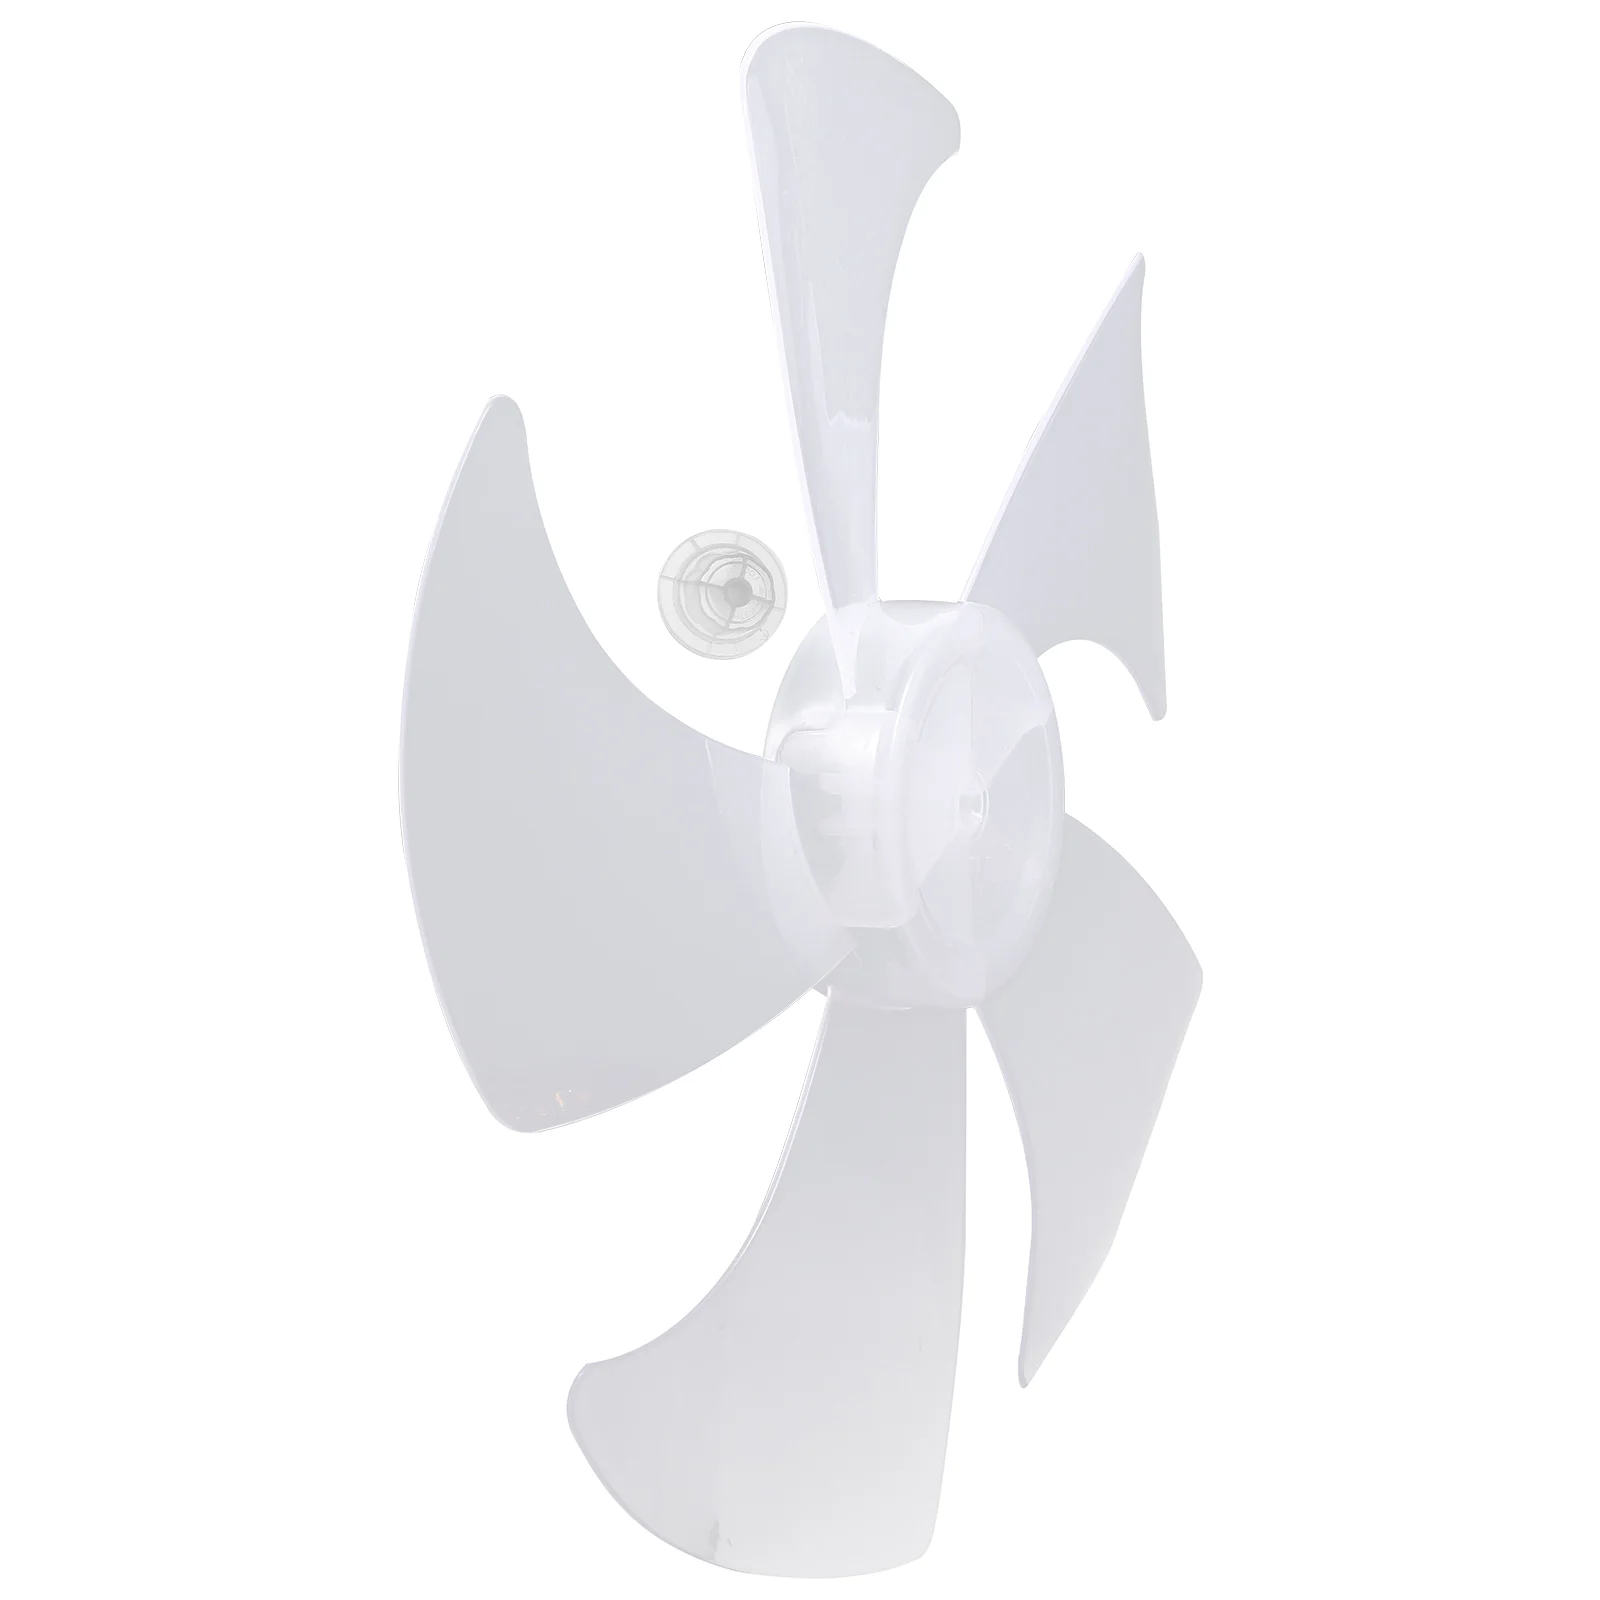 14Inch Ceiling Desktop Fans Blades Electric Ceiling Desktop Fans Replacement Ceiling Desktop Fans Blades Thickened Universal